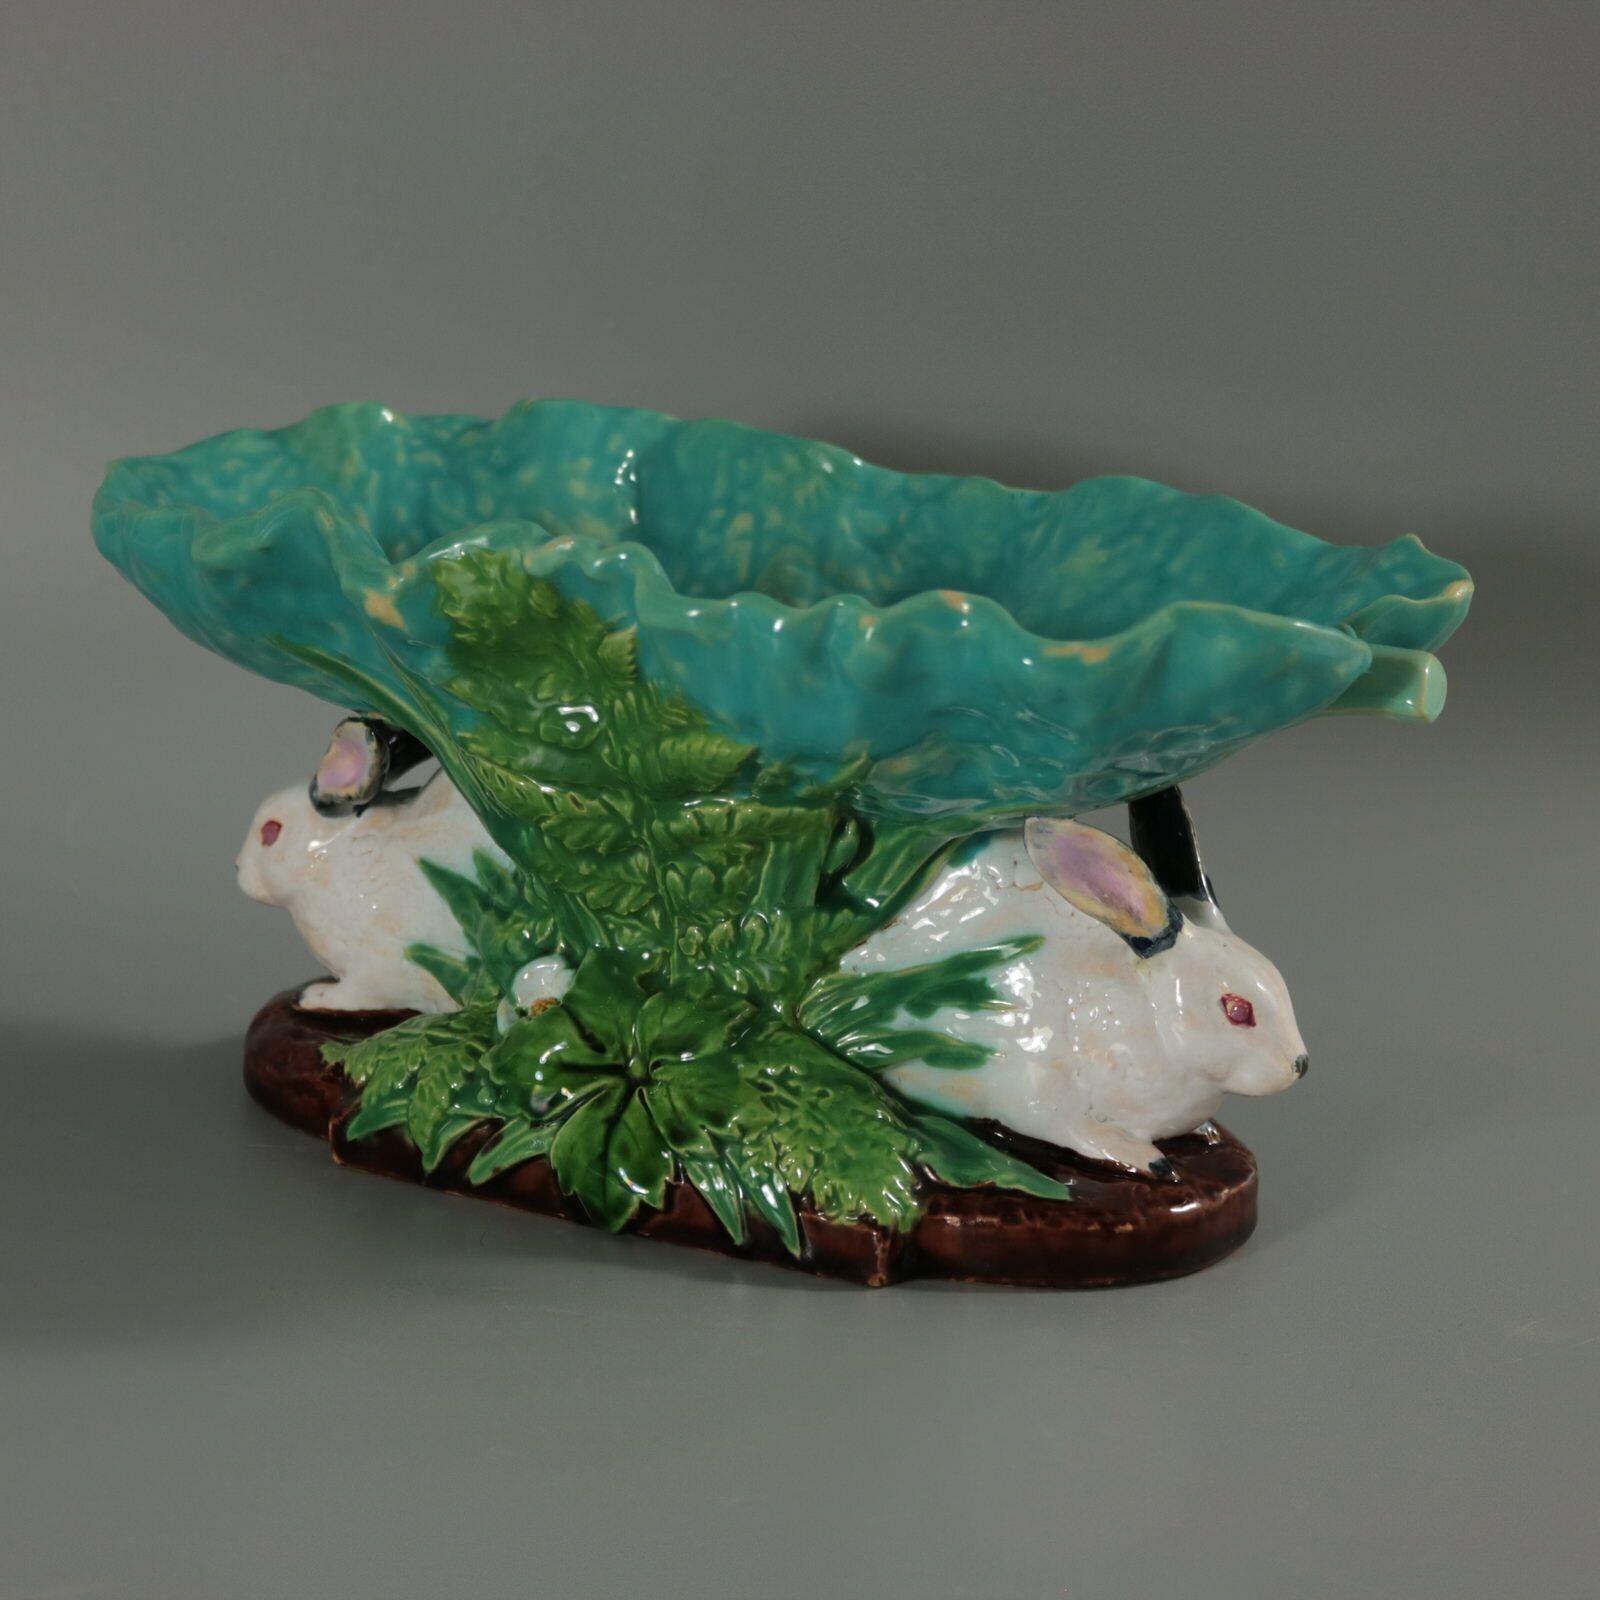 Minton Majolica figural bowl which features two rabbits amongst foliage, supporting a leaf. Colouration: turquoise, green, white, are predominant. The piece bears maker's marks for the Minton pottery. Bears a pattern number, '1451'. Marks include a